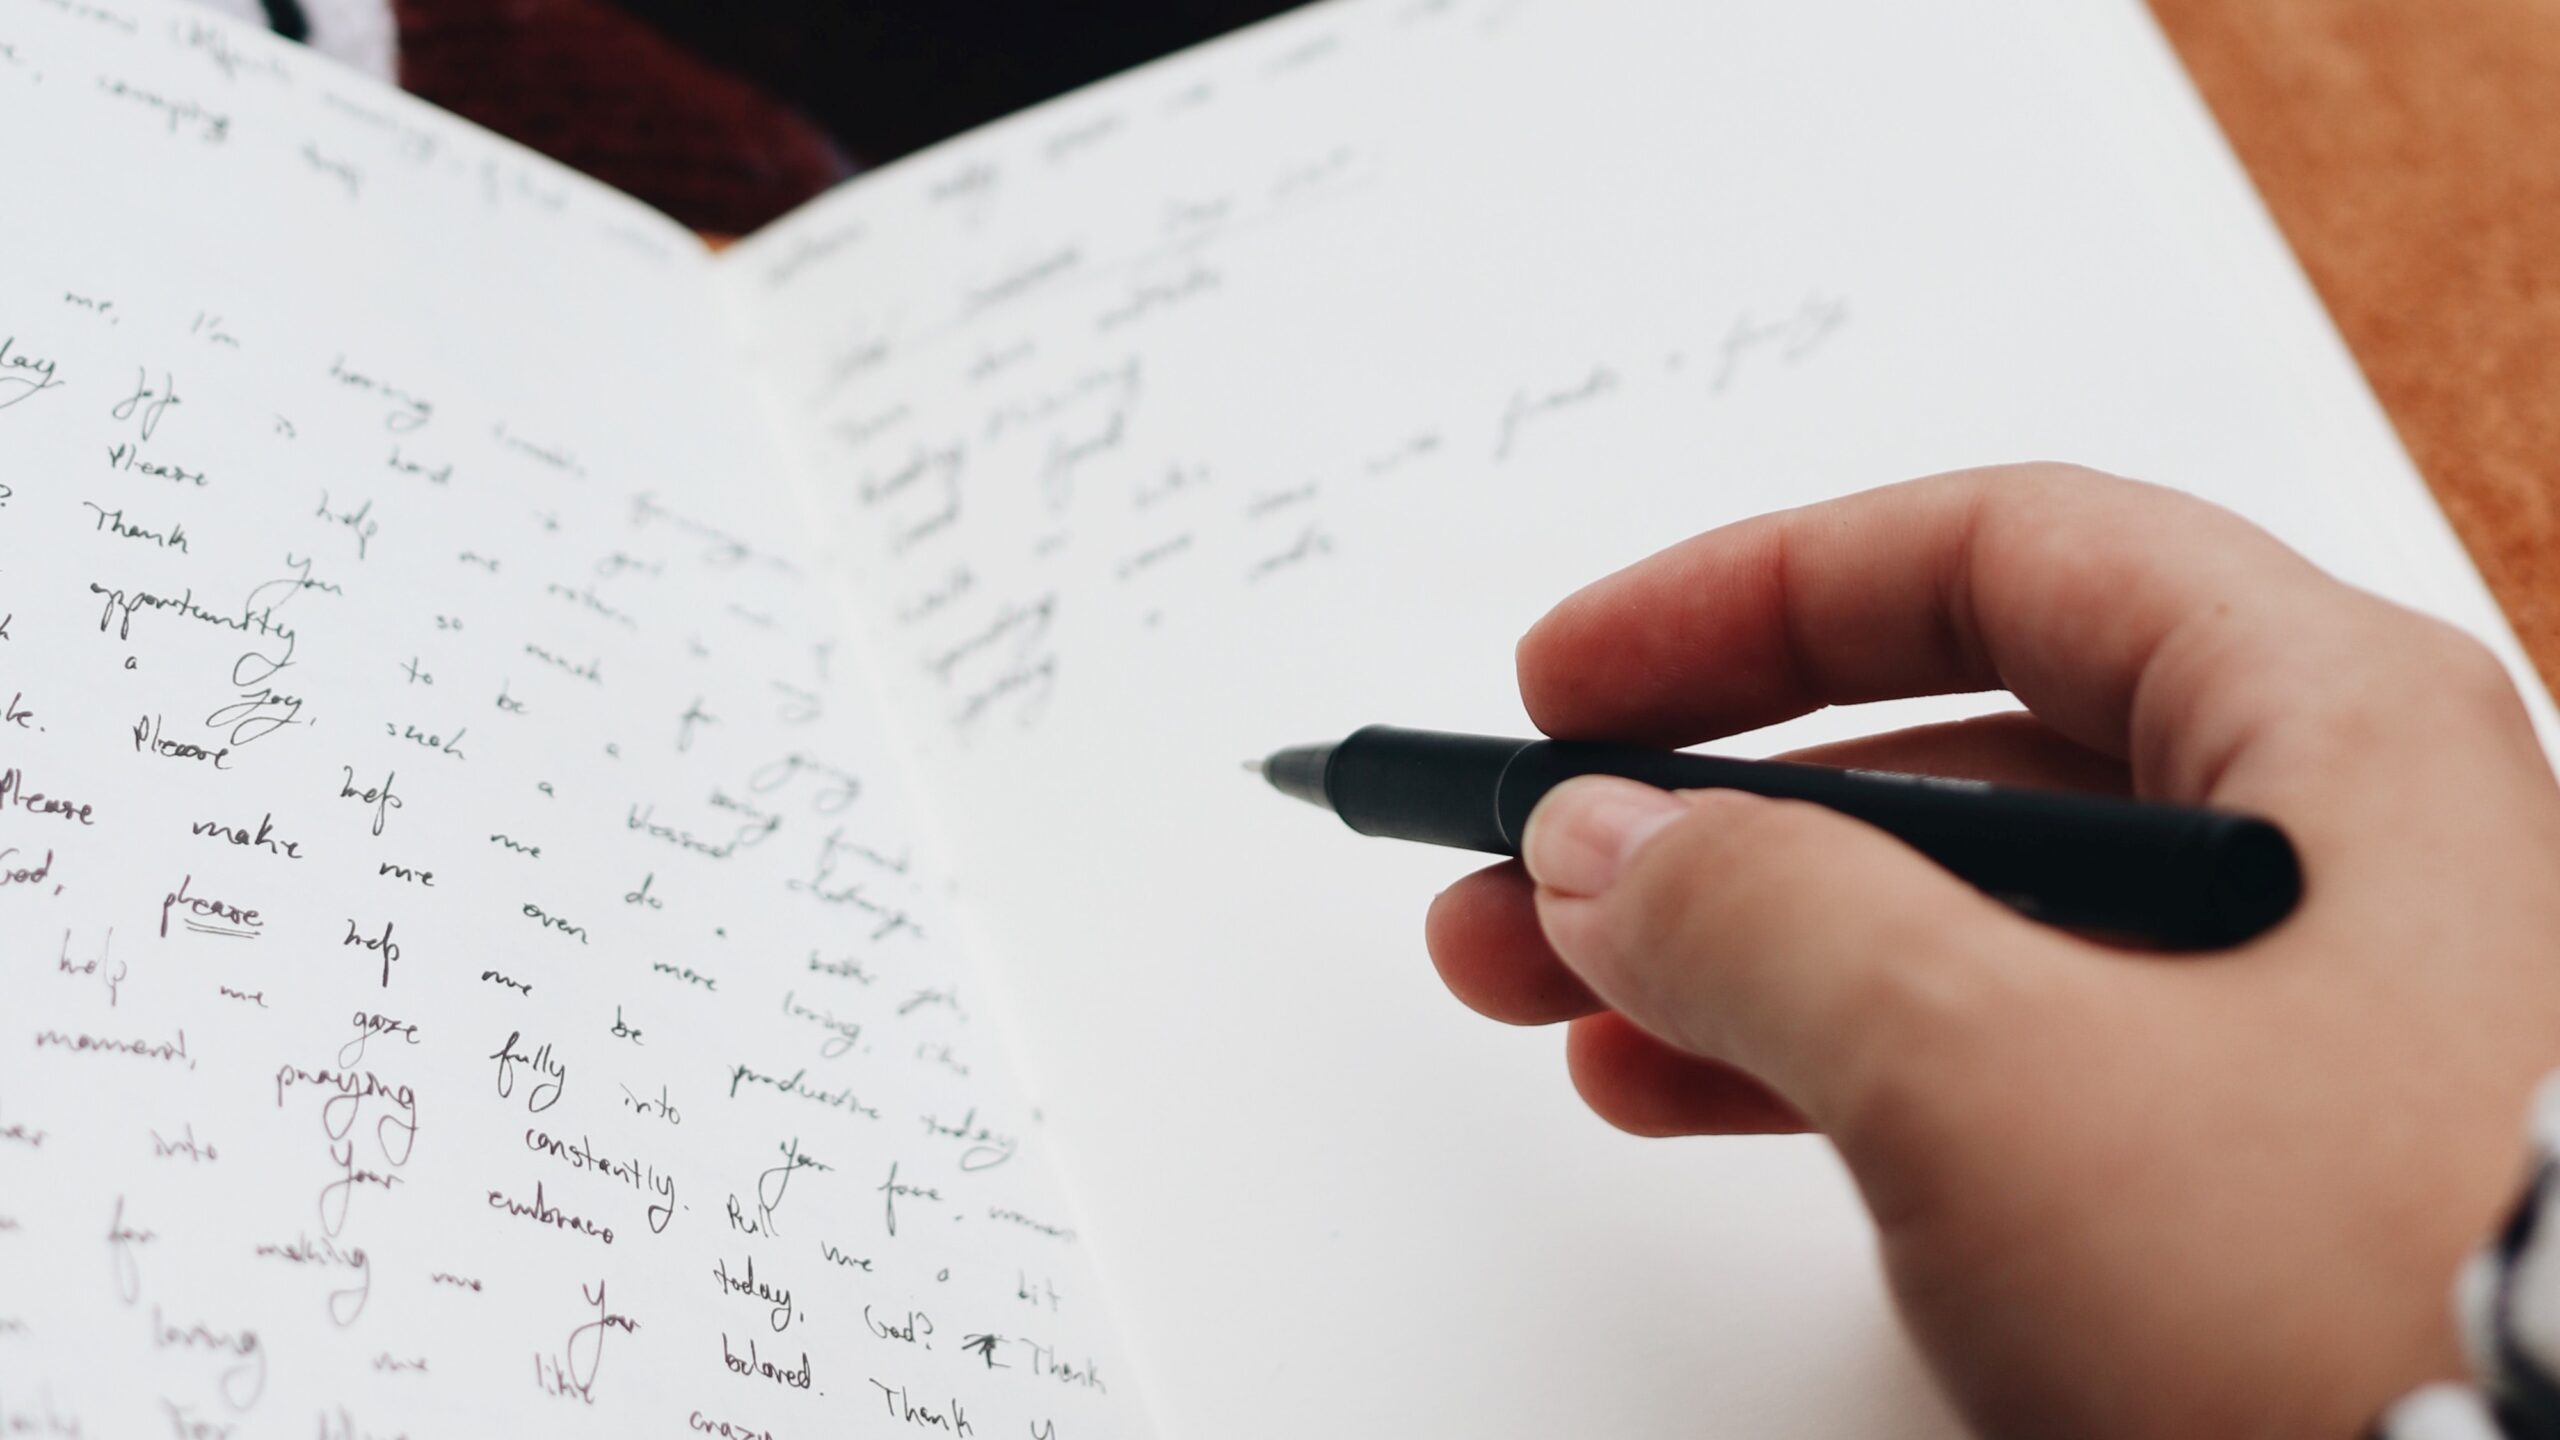 A person's hand writing on a piece of paper.